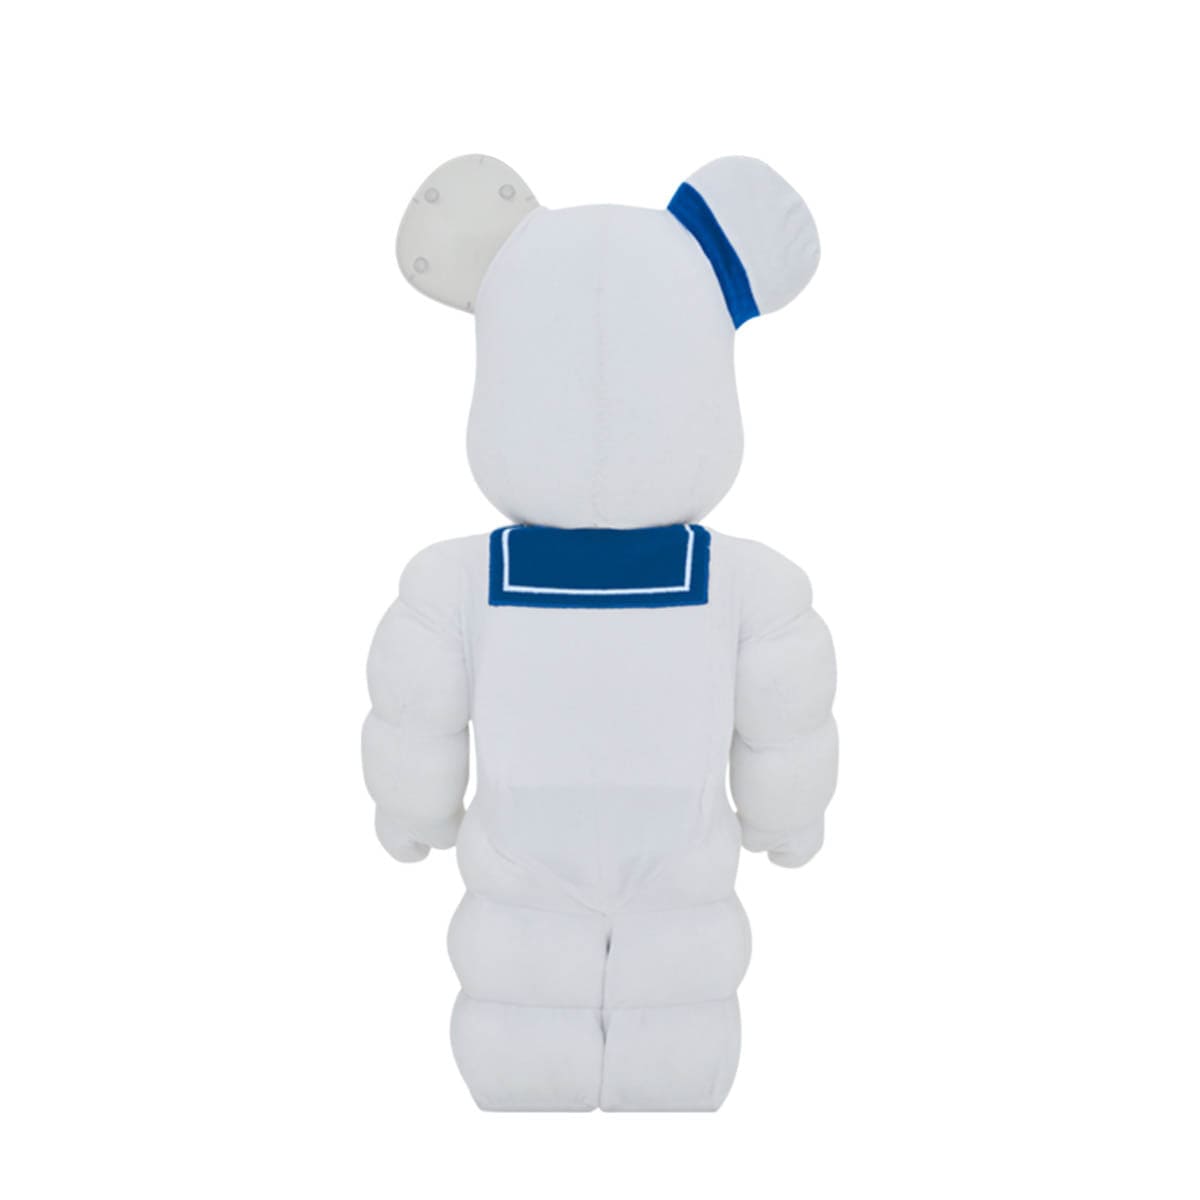 Medicom Toy Odds & Ends MULTI / O/S BE@RBRICK STAY PUFT MARSHMALLOW MAN COSTUME VER. 1000%